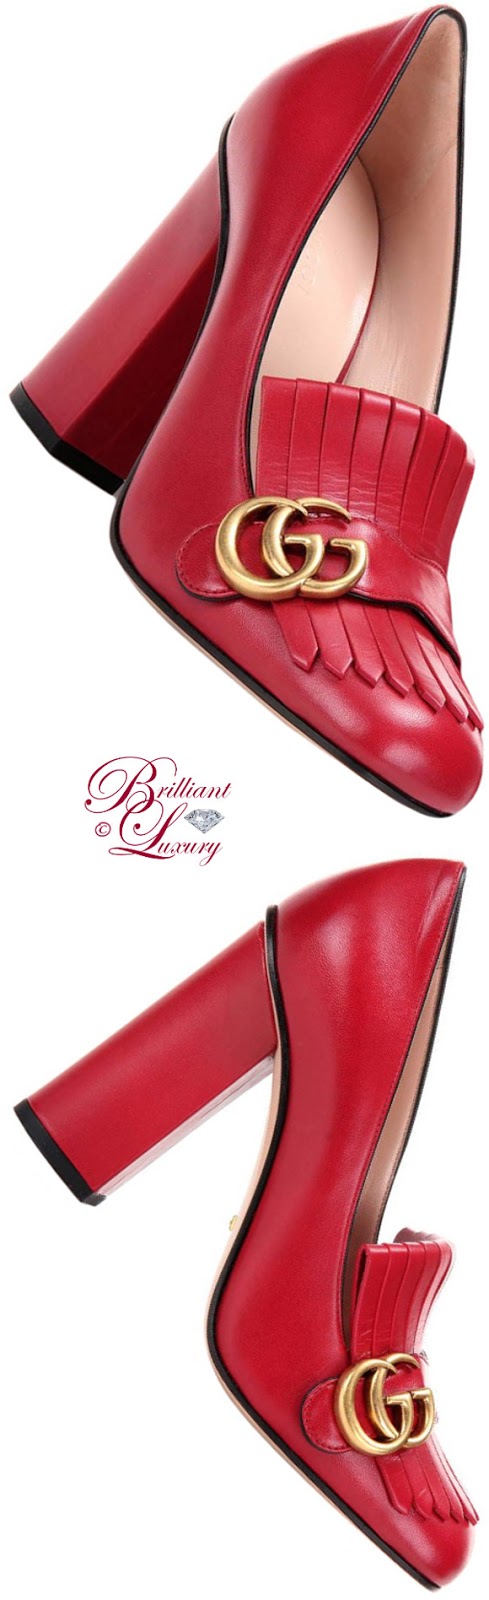 Brilliant Luxury ♦ Gucci leather loafer pumps in #red